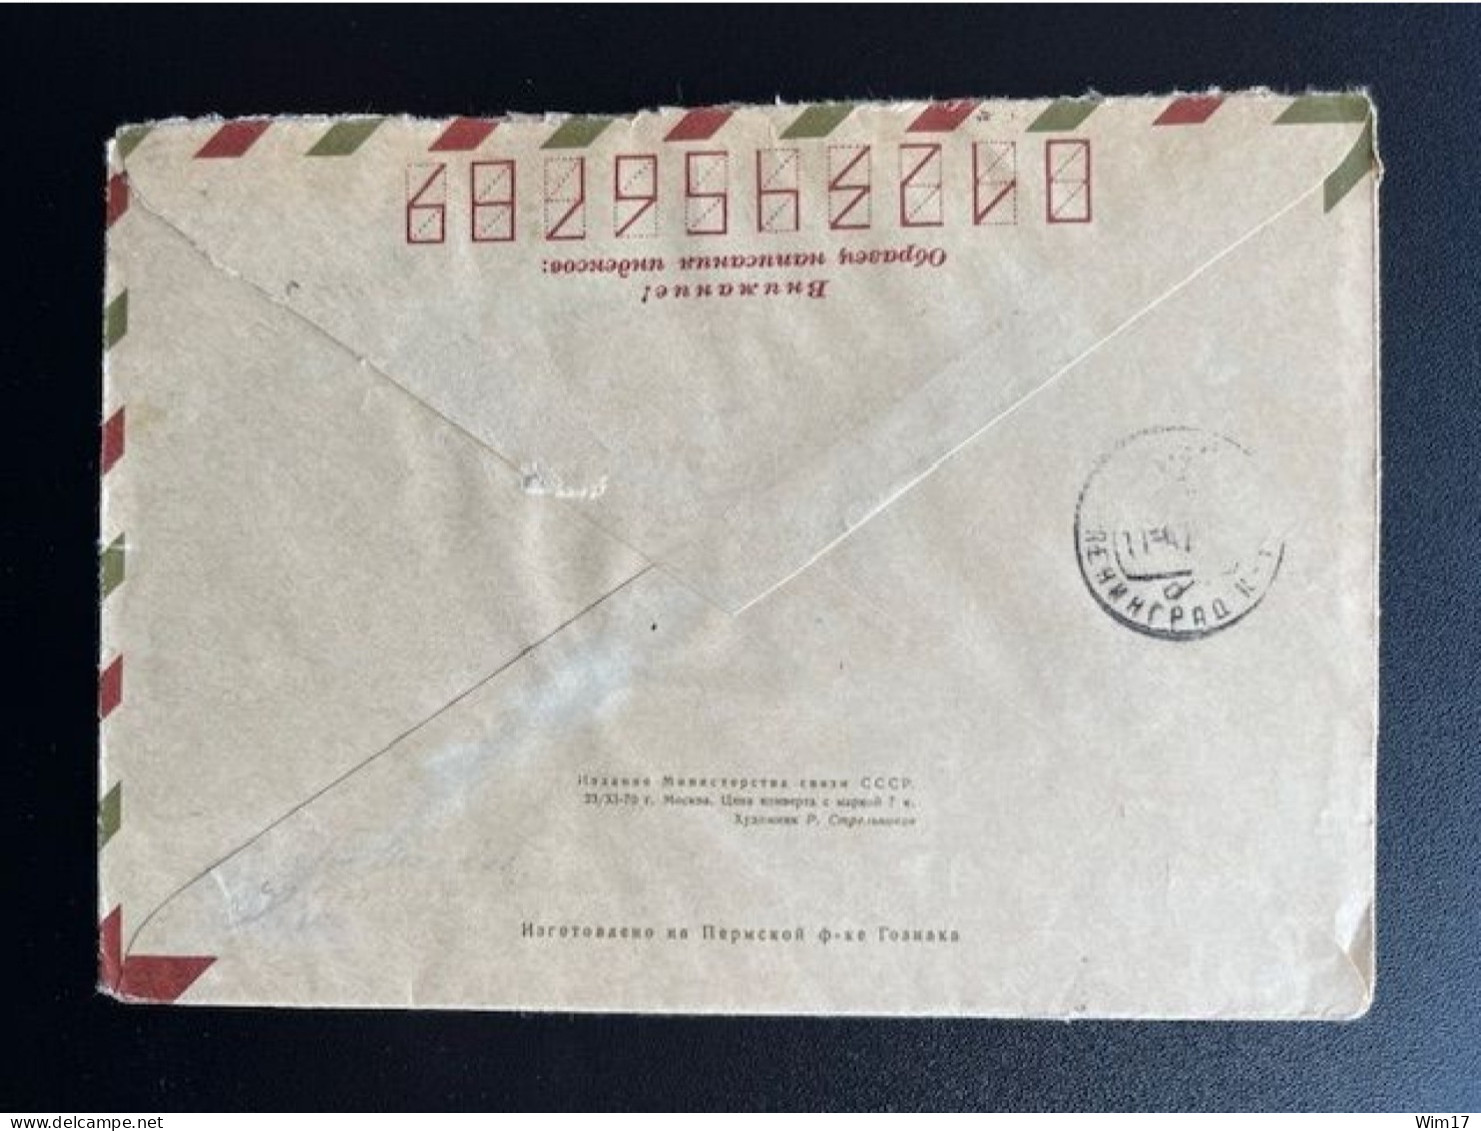 RUSSIA USSR 1971 REGISTERED LETTER MOSCOW 08-04-1971 SOVJET UNIE CCCP SOVIET UNION SPACE GAGARIN - Storia Postale